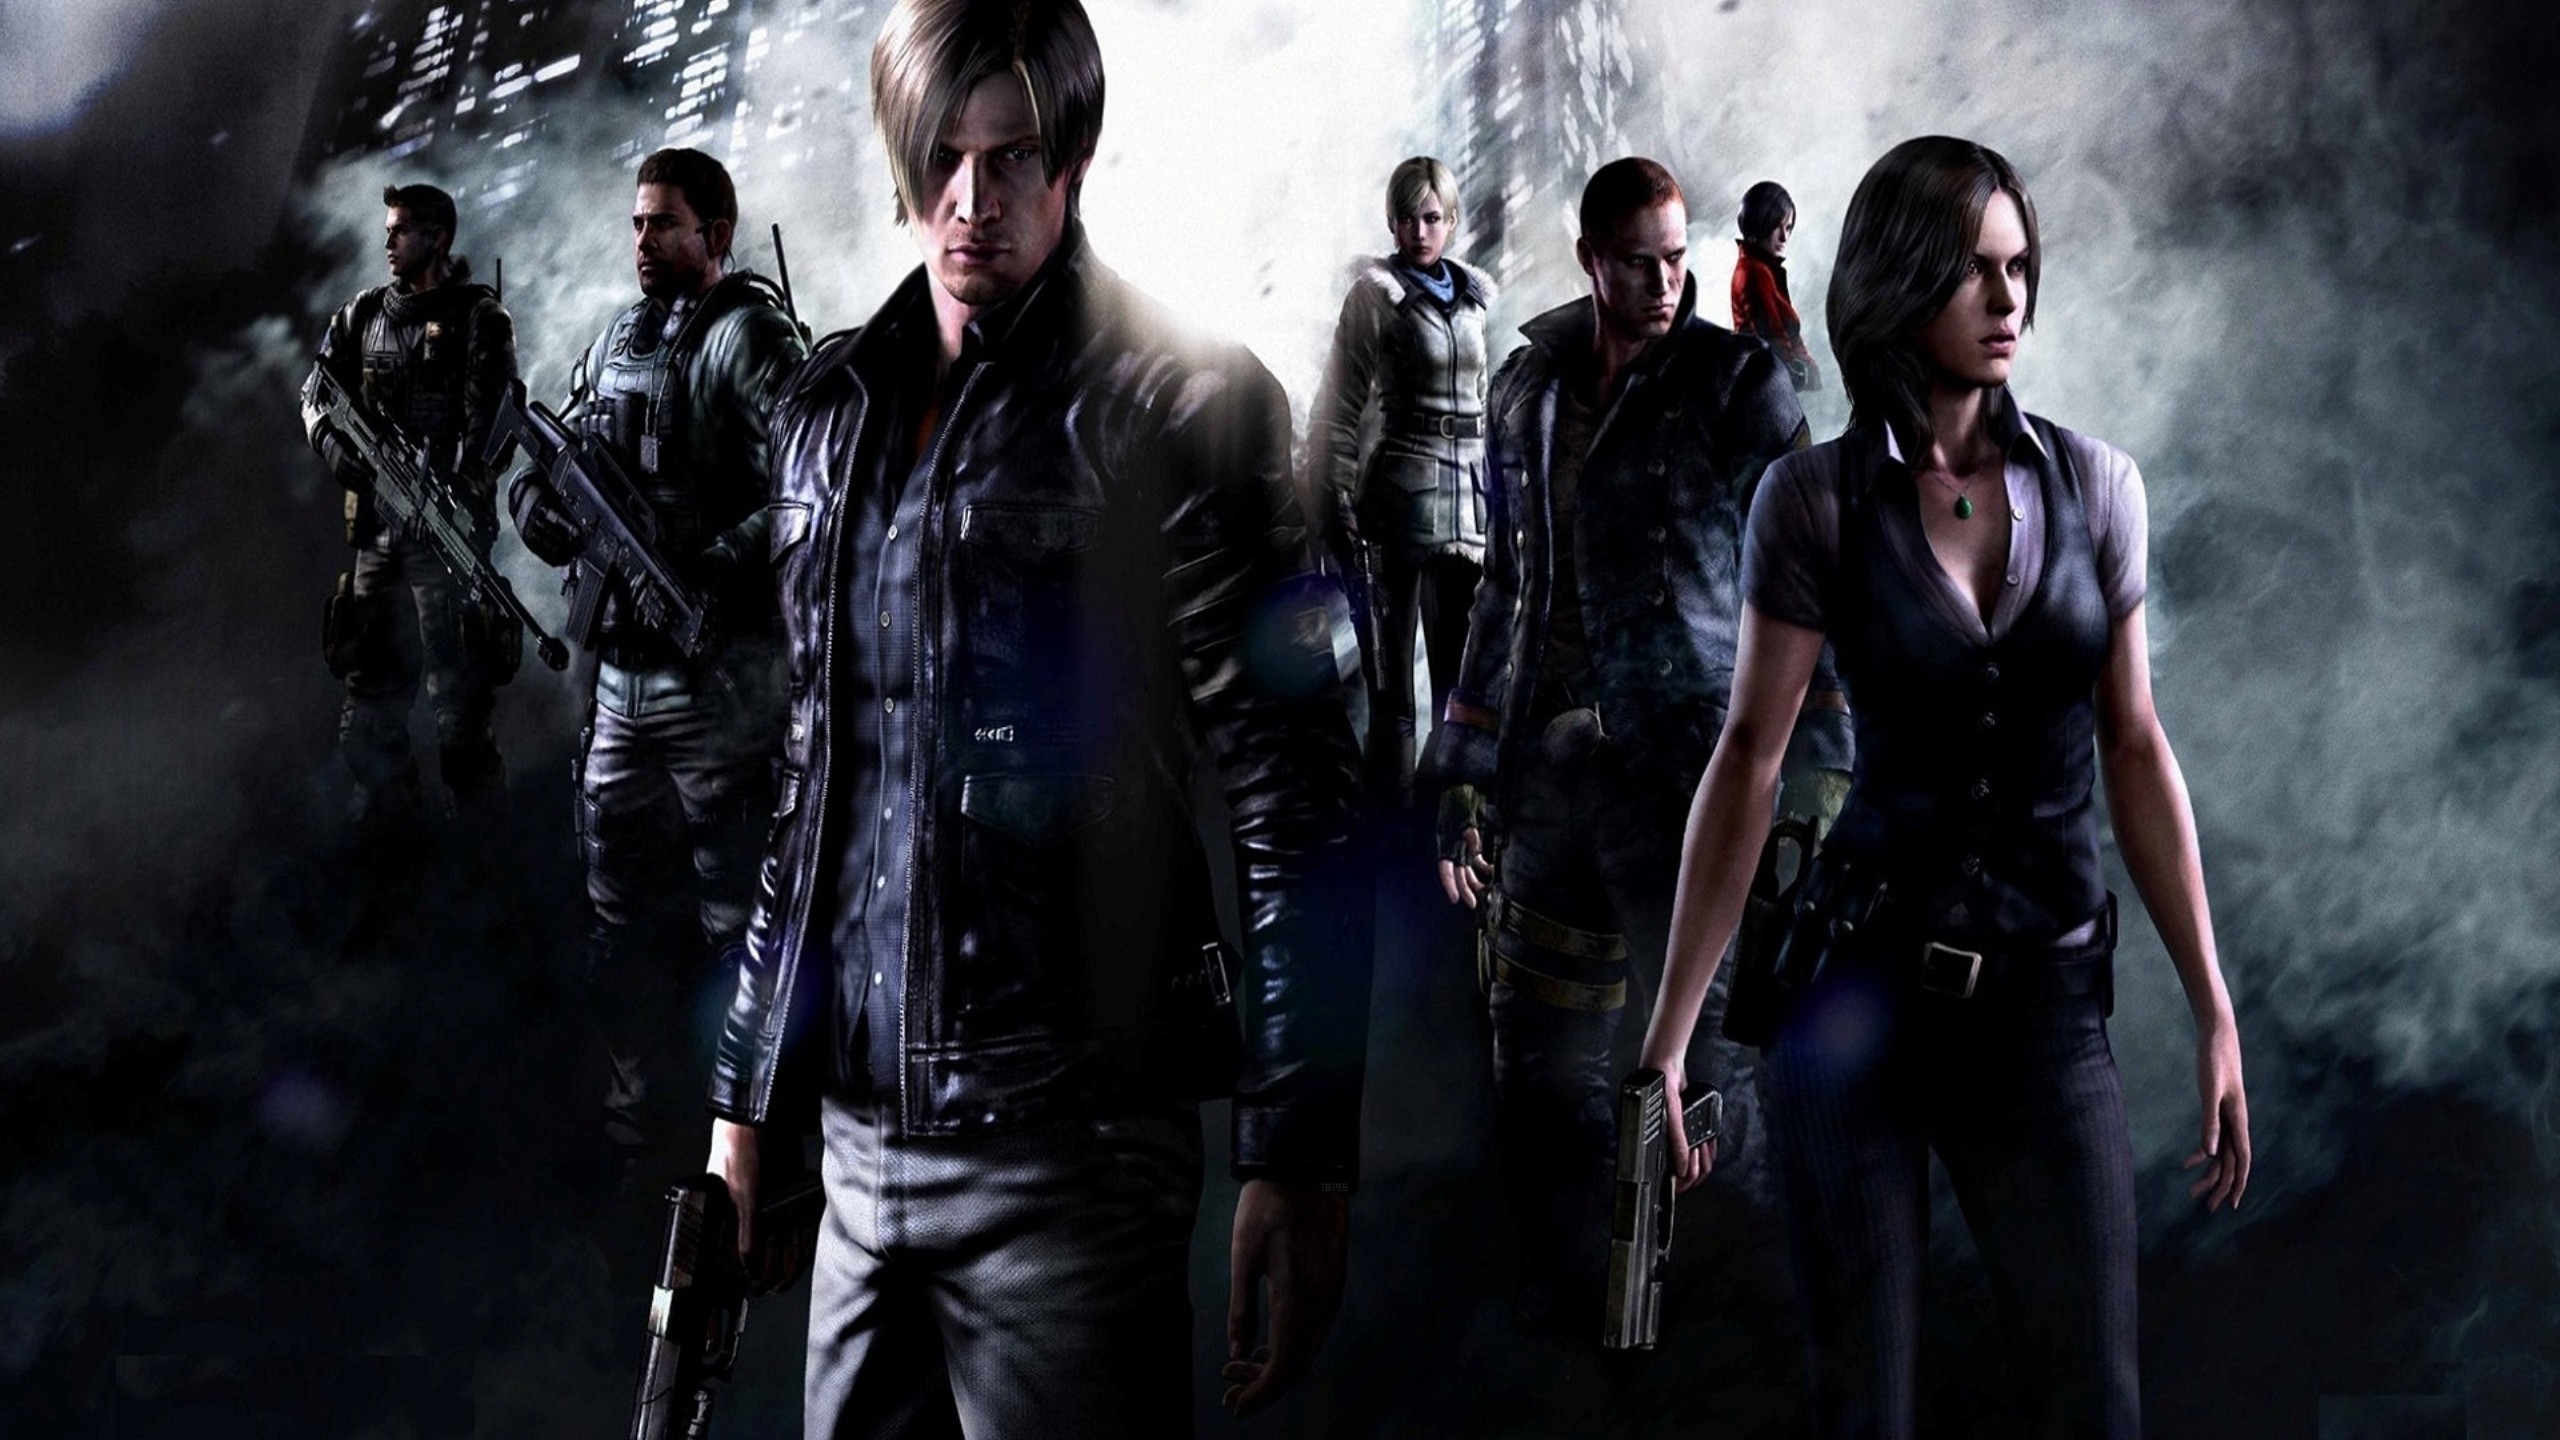 2560x1440 Title : resident evil video game wallpaper | hd wallpapers. Dimension : 2560  x 1440. File Type : JPG/JPEG